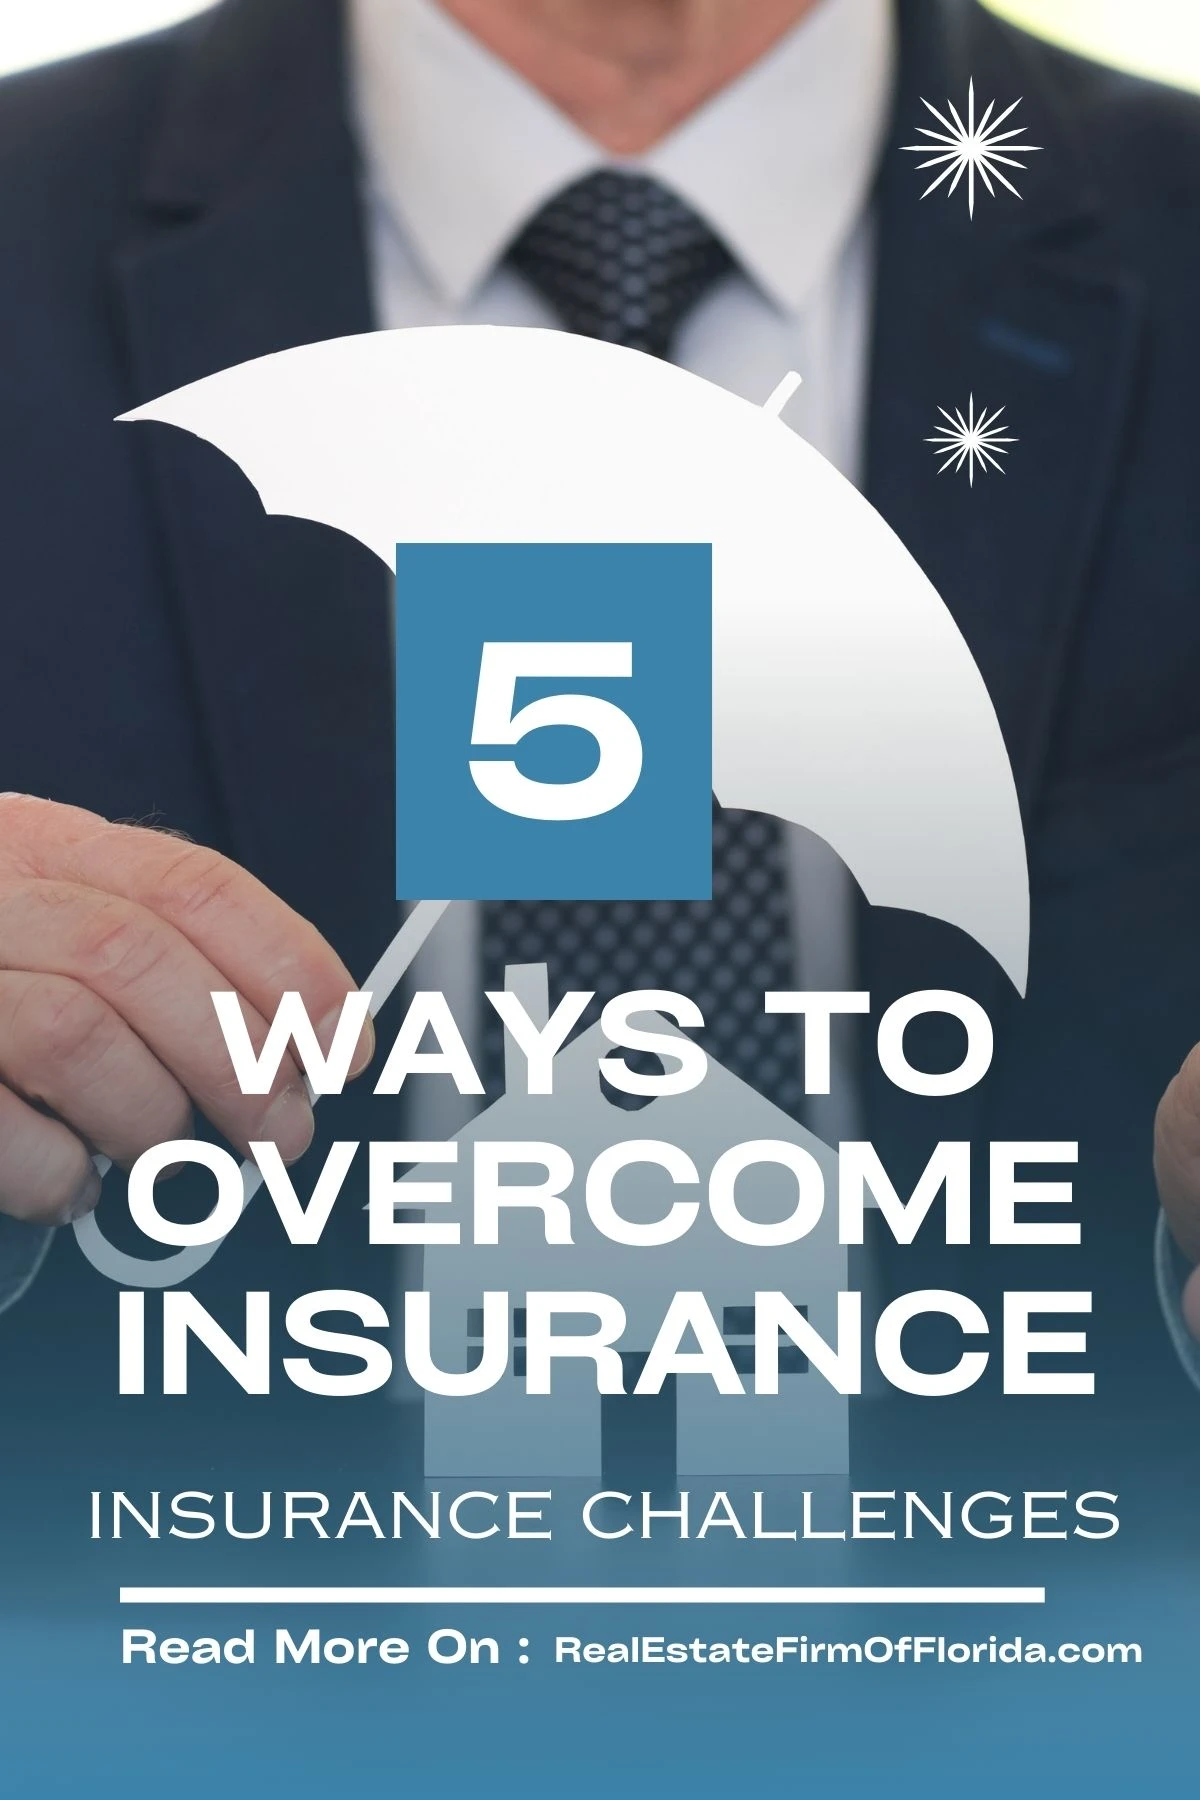 5 Ways to Overcome Insurance Challenges